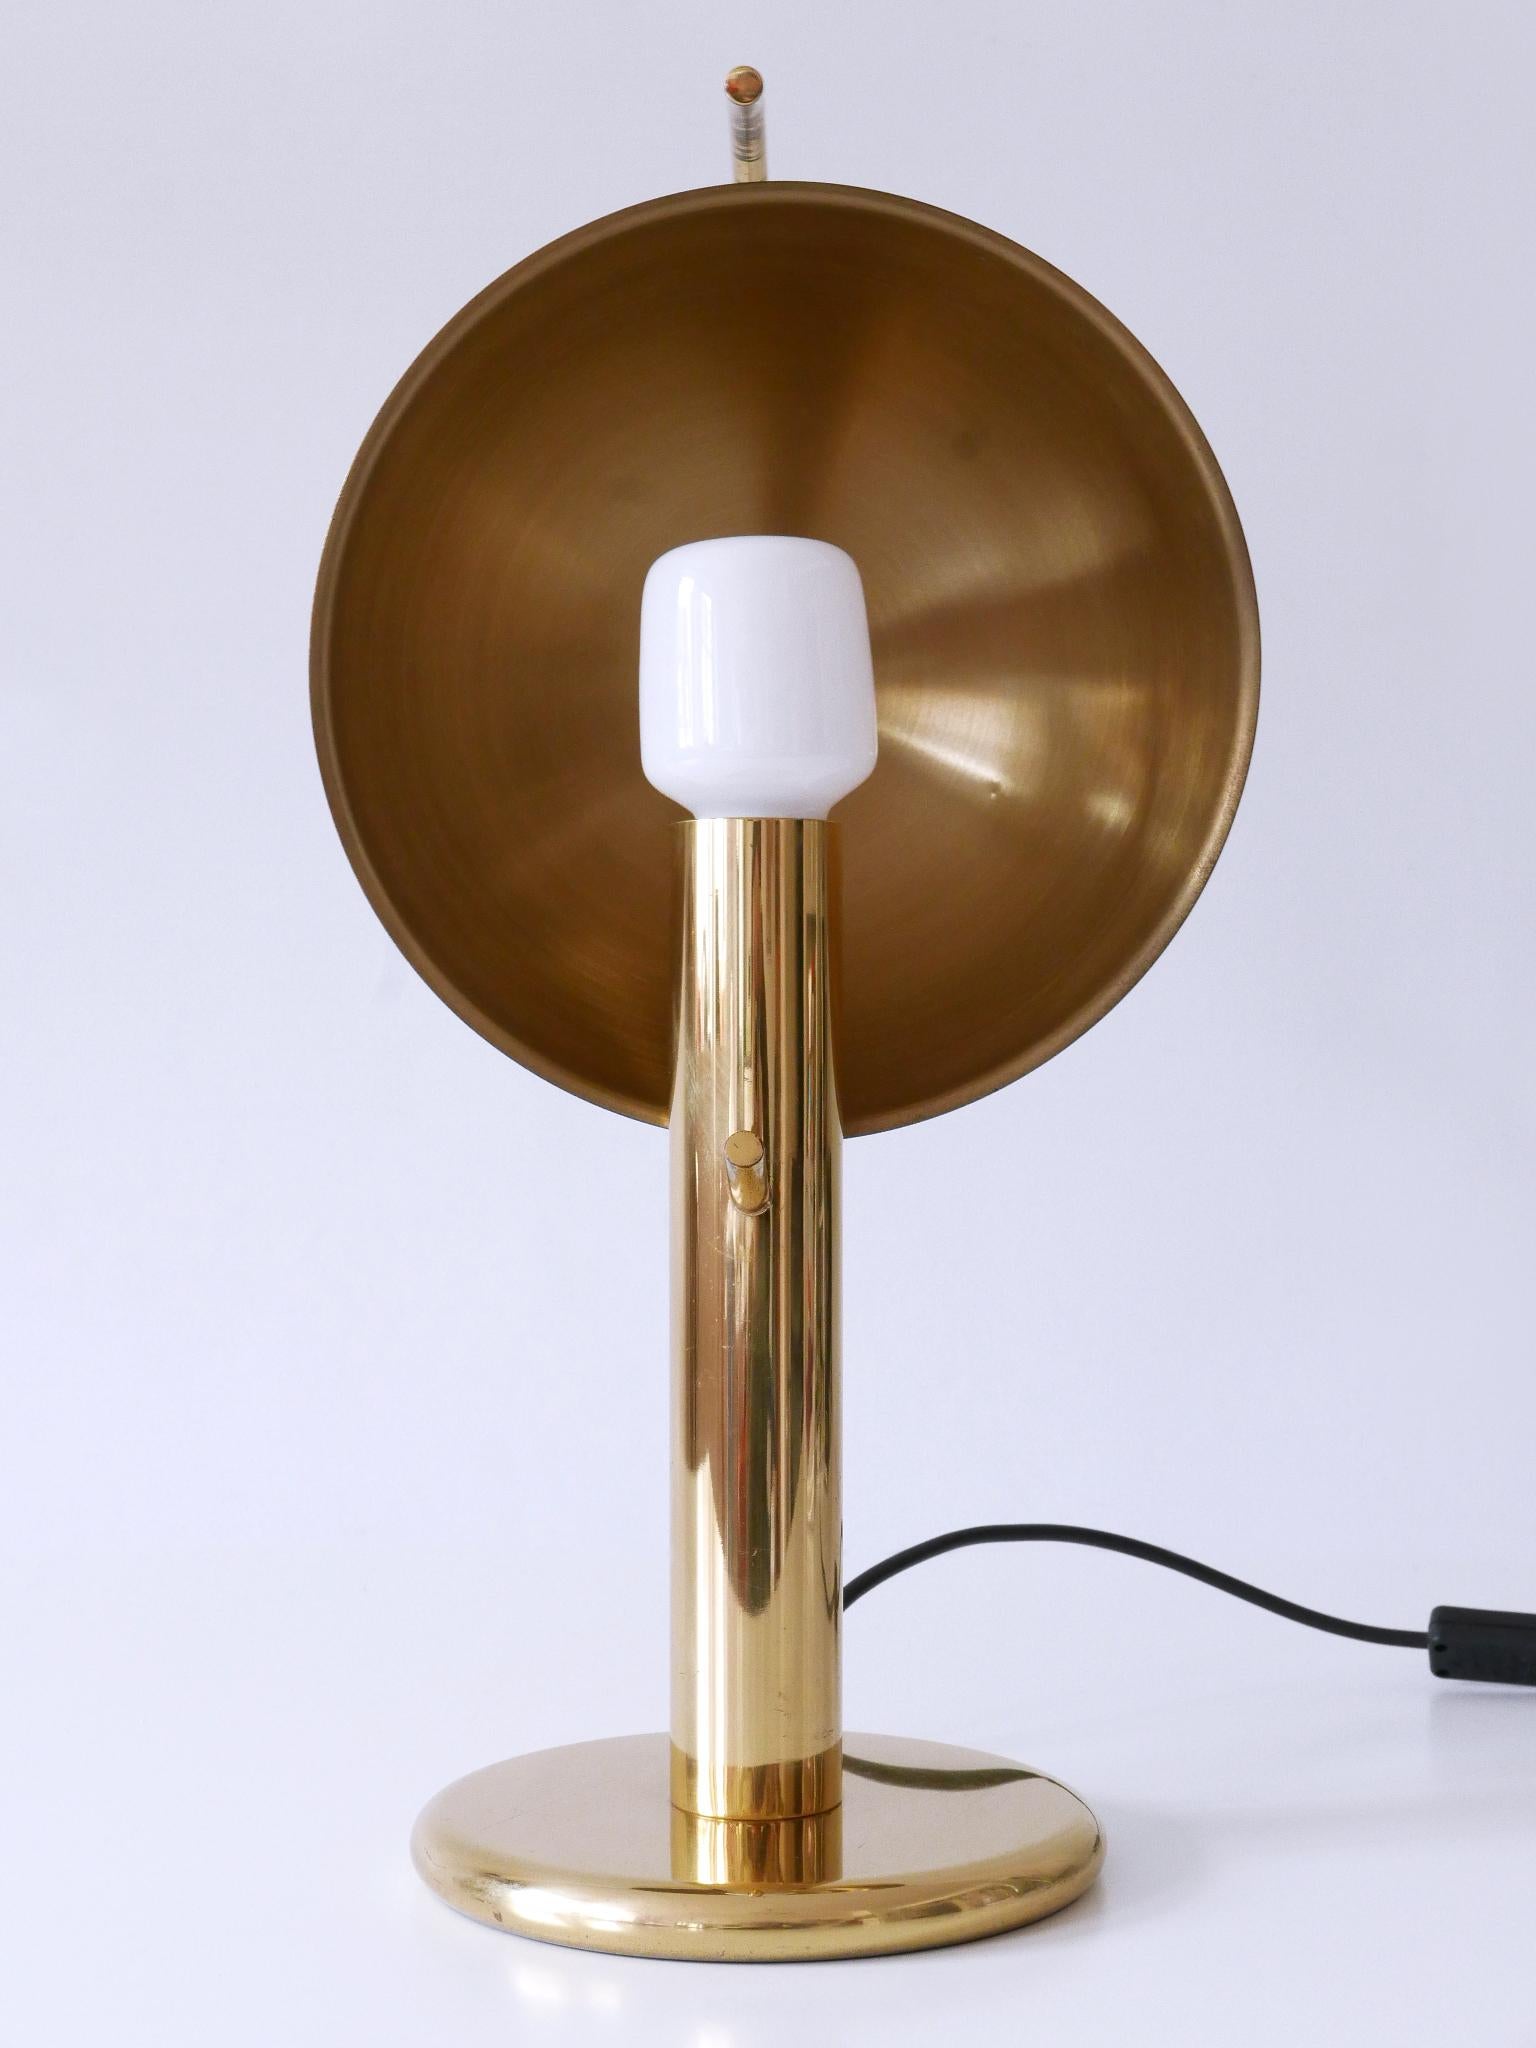 Exceptional Mid-Century Modern Brass Table Lamp by Gebrüder Cosack Germany 1960s For Sale 3